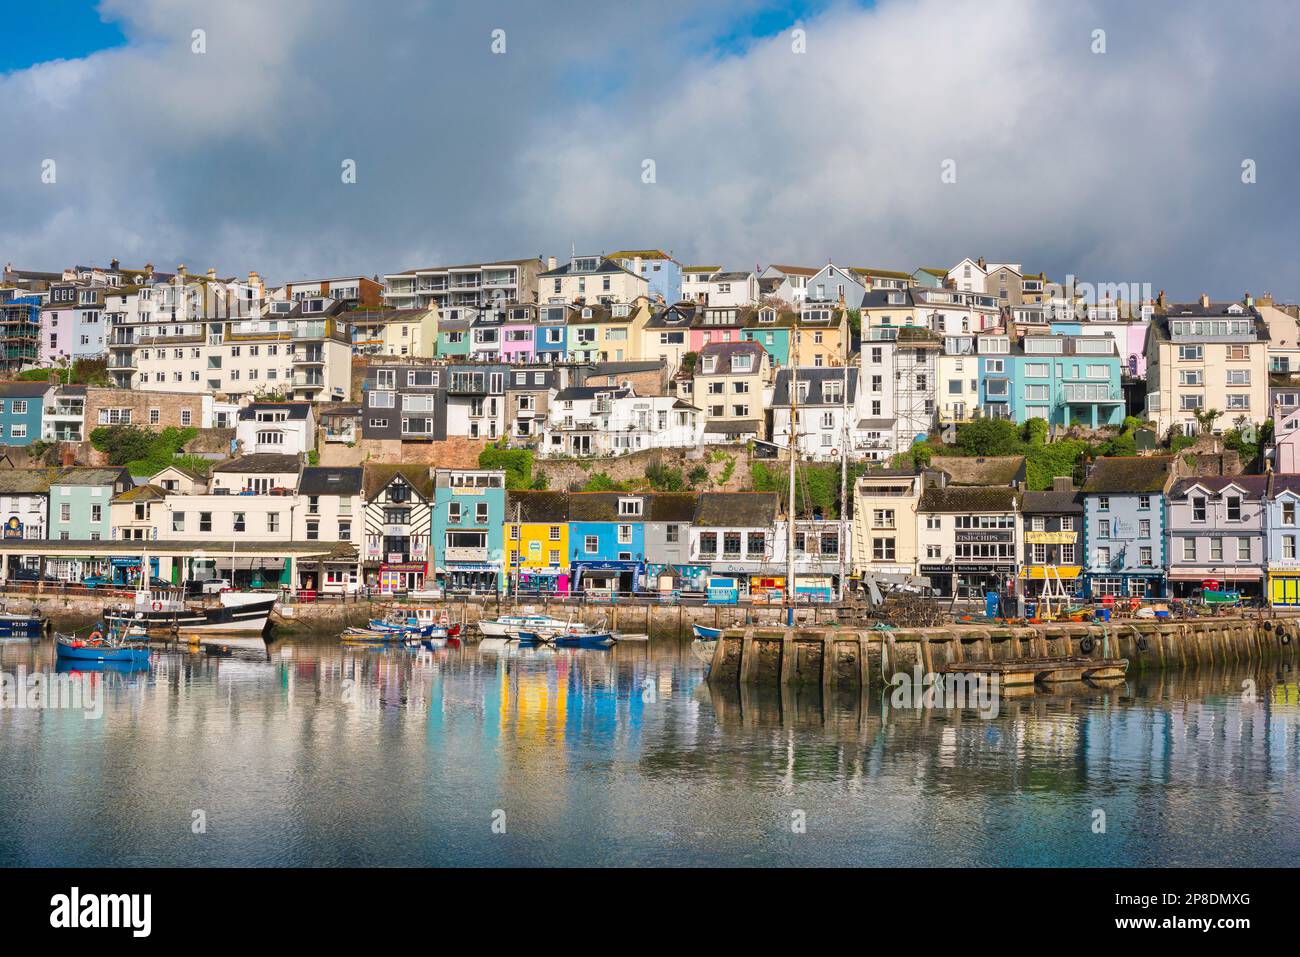 Brixham Devon, view of colourful waterfront property in the harbour at Brixham, Torbay, Devon, south west England, UK Stock Photo